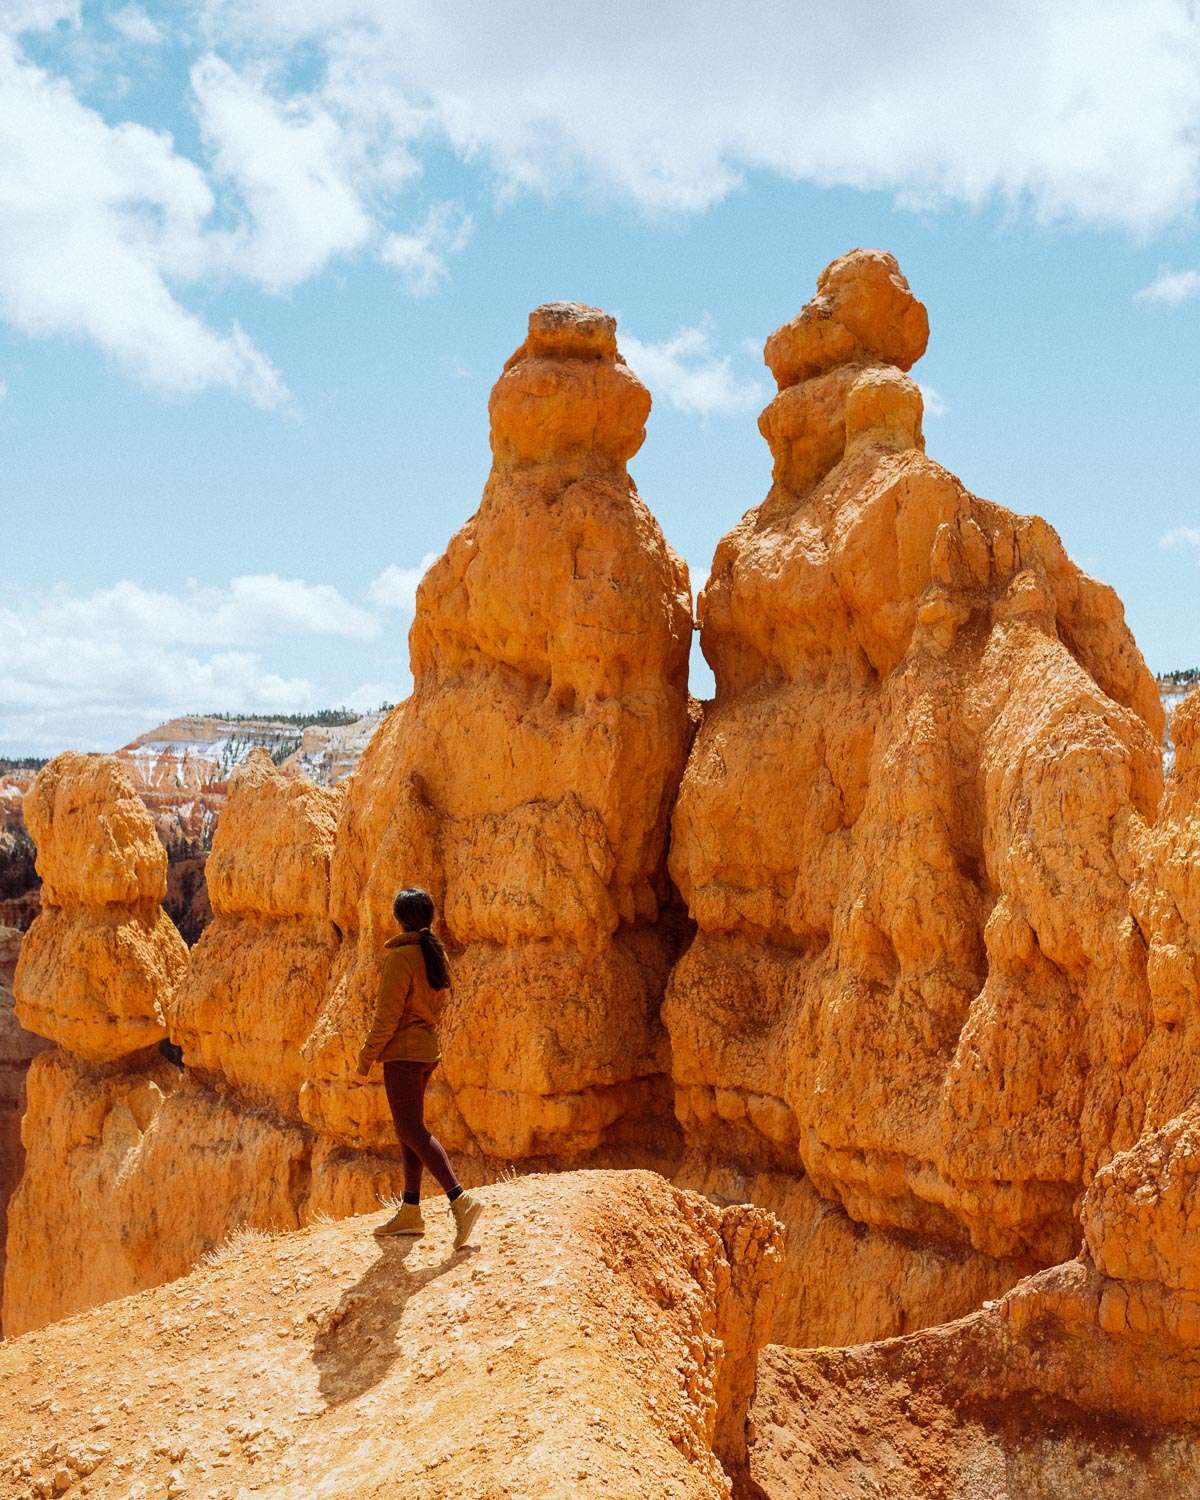 Rachel Off Duty: A Girl in a Yellow Jacket Stands Next to Hoodoos in Bryce Canyon